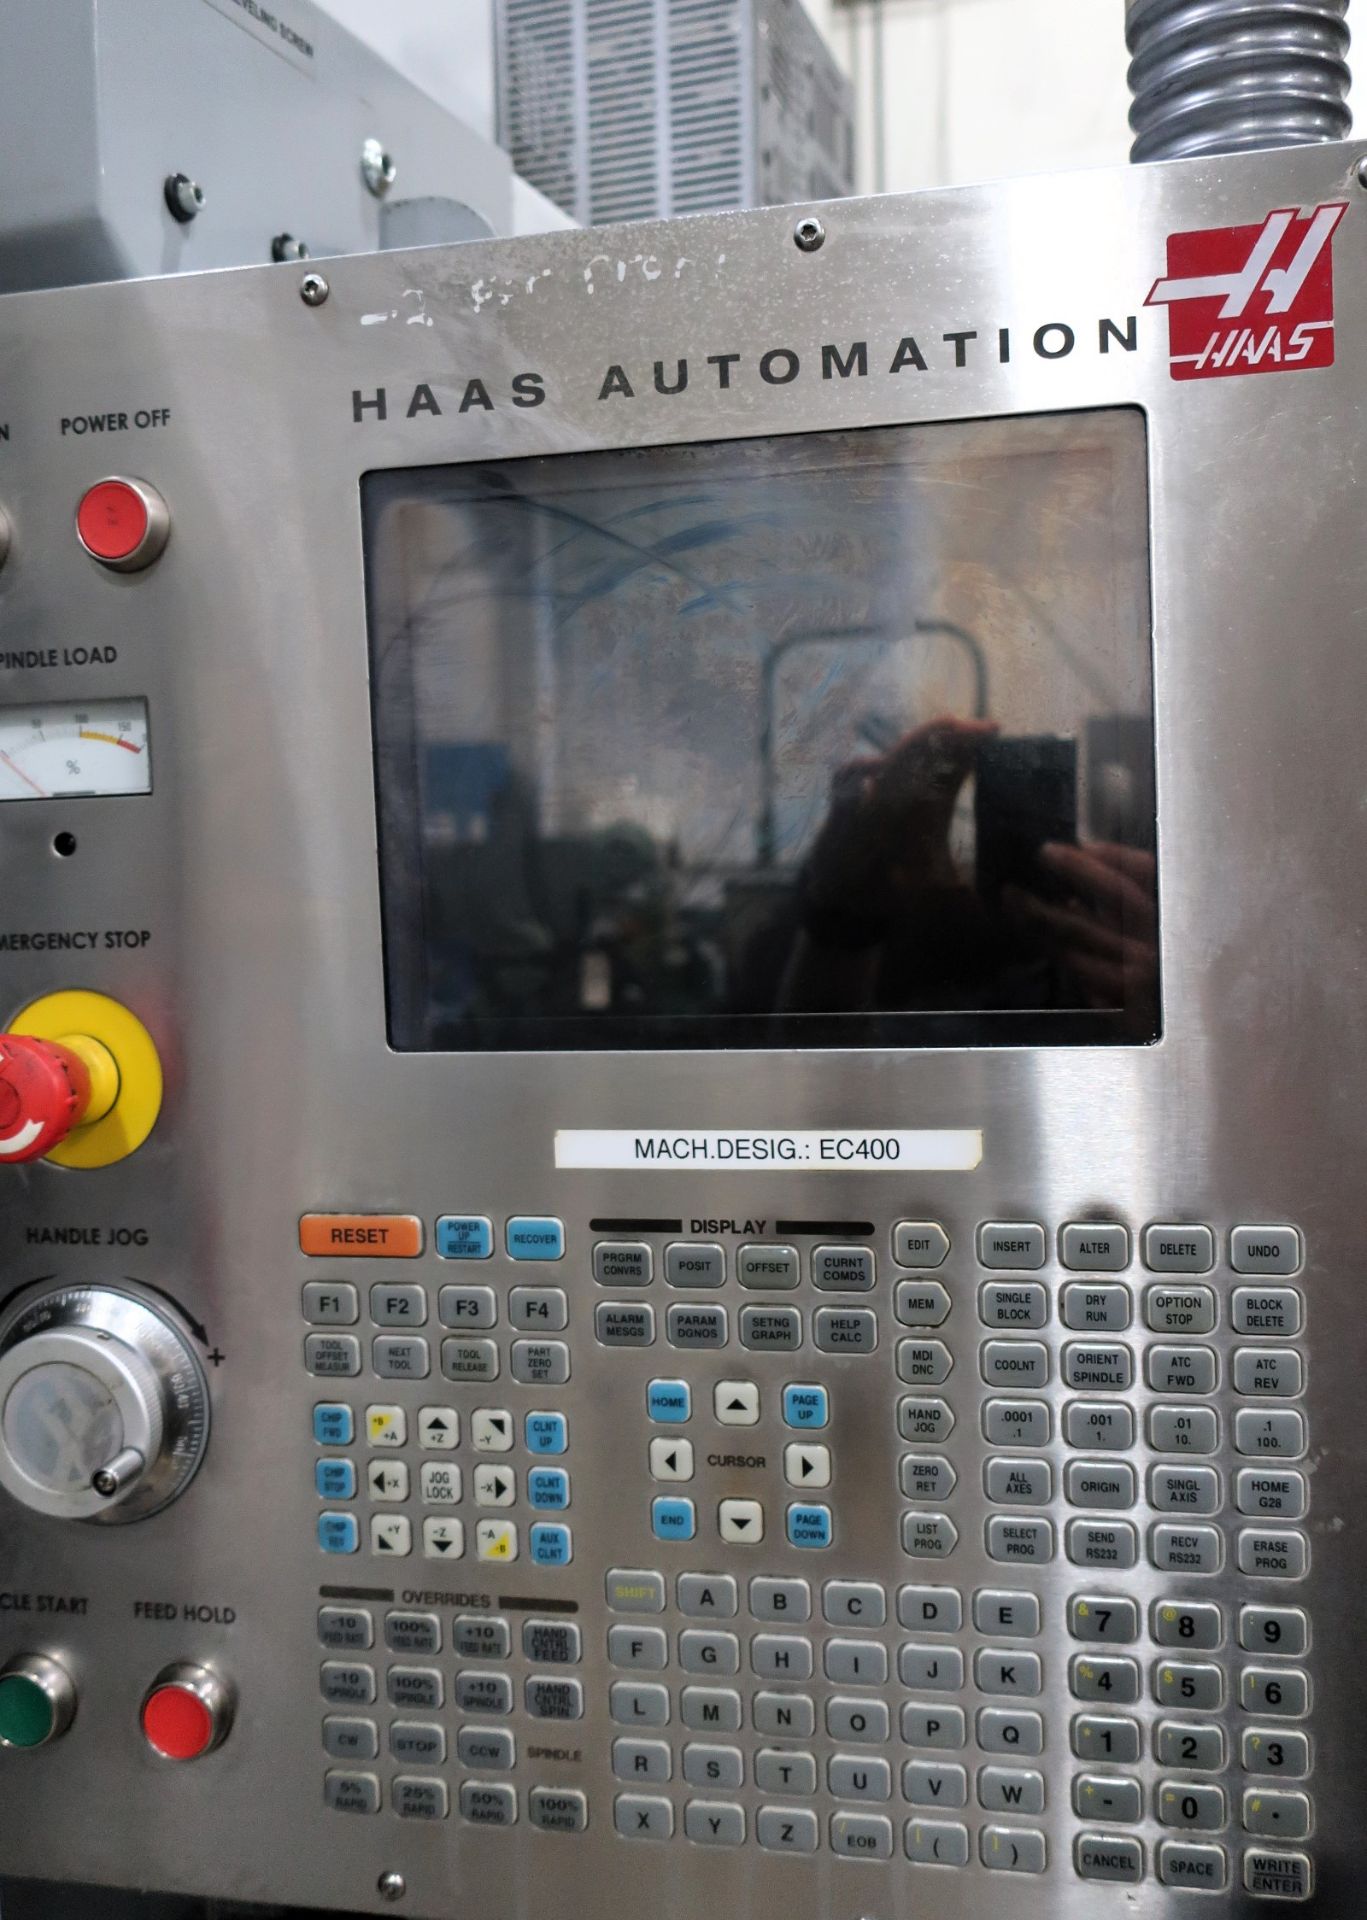 HAAS EC-400 4-AXIS PRECISION HORIZONTAL MACHINING CENTER W/16" PALLETS, S/N 51499 - Image 2 of 12